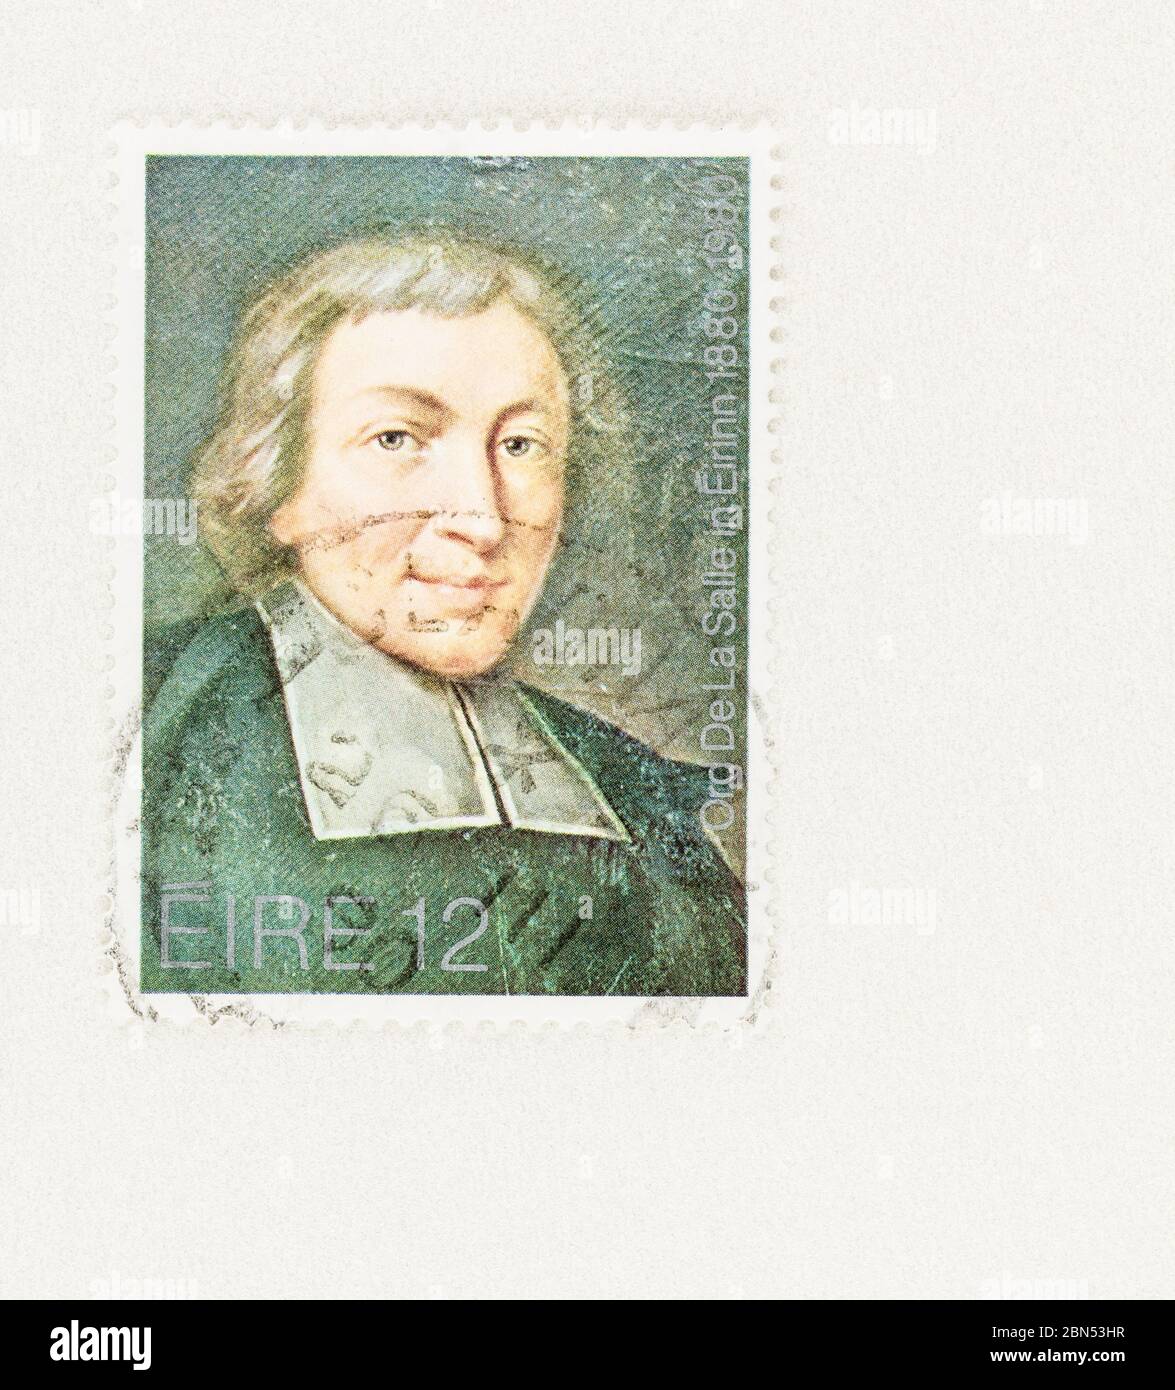 SEATTLE WASHINGTON - May 11, 2020:  Brother St. Jean-Baptiste de la Salle on 1980 stamp, commemorating 100 years of the Order in Ireland. Scott # 477 Stock Photo